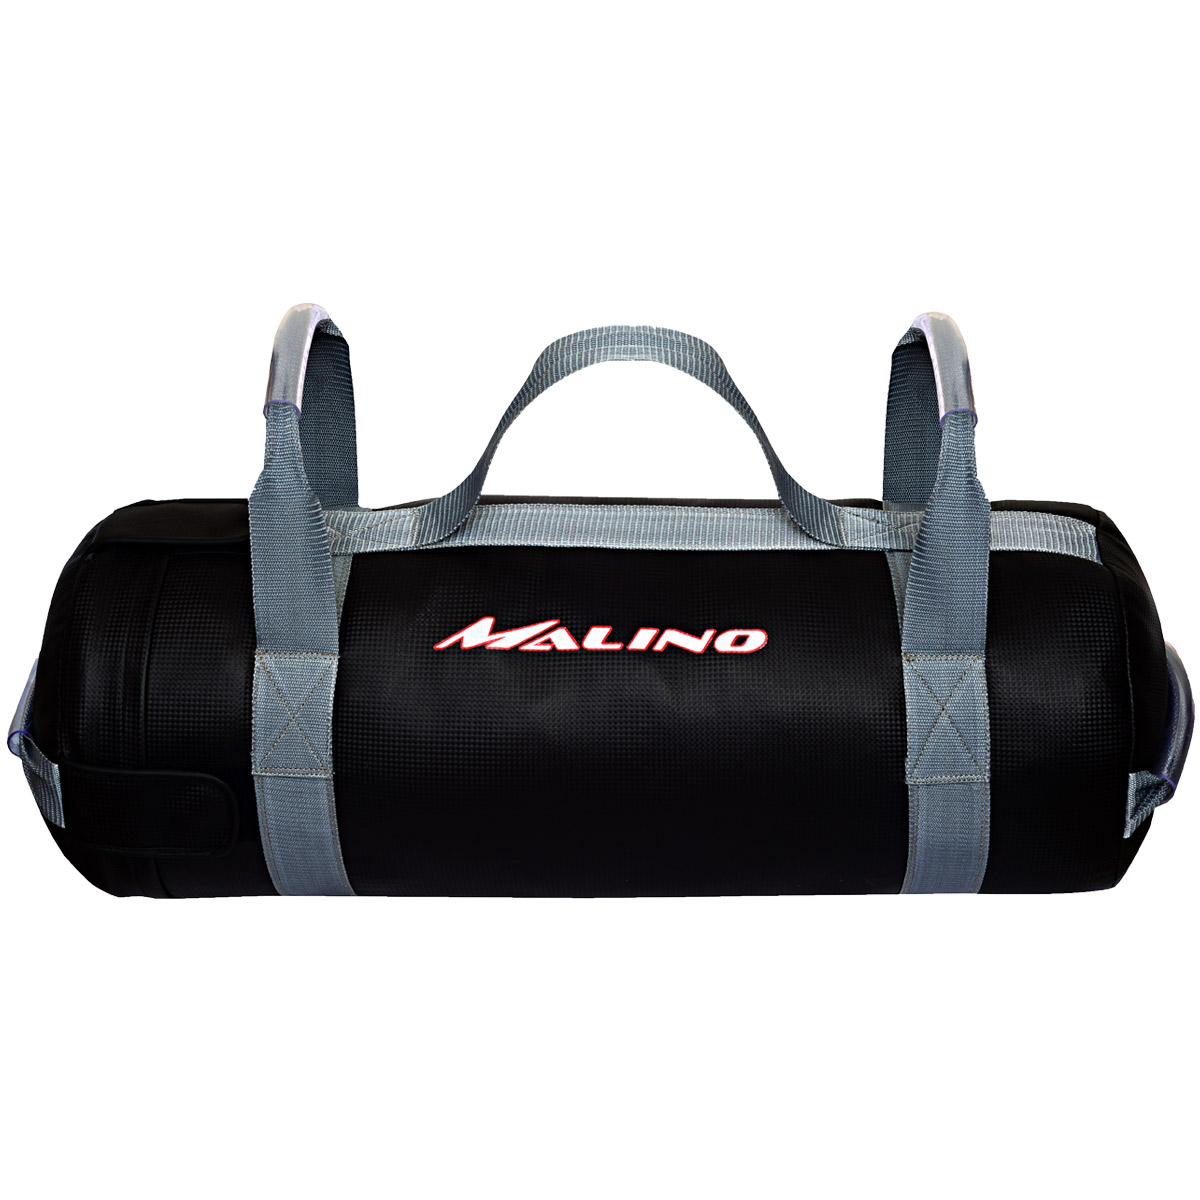 Malino Weight Lifting Bag Sand Bag Power Bag 10KG PRE FILLED READY TO USE 